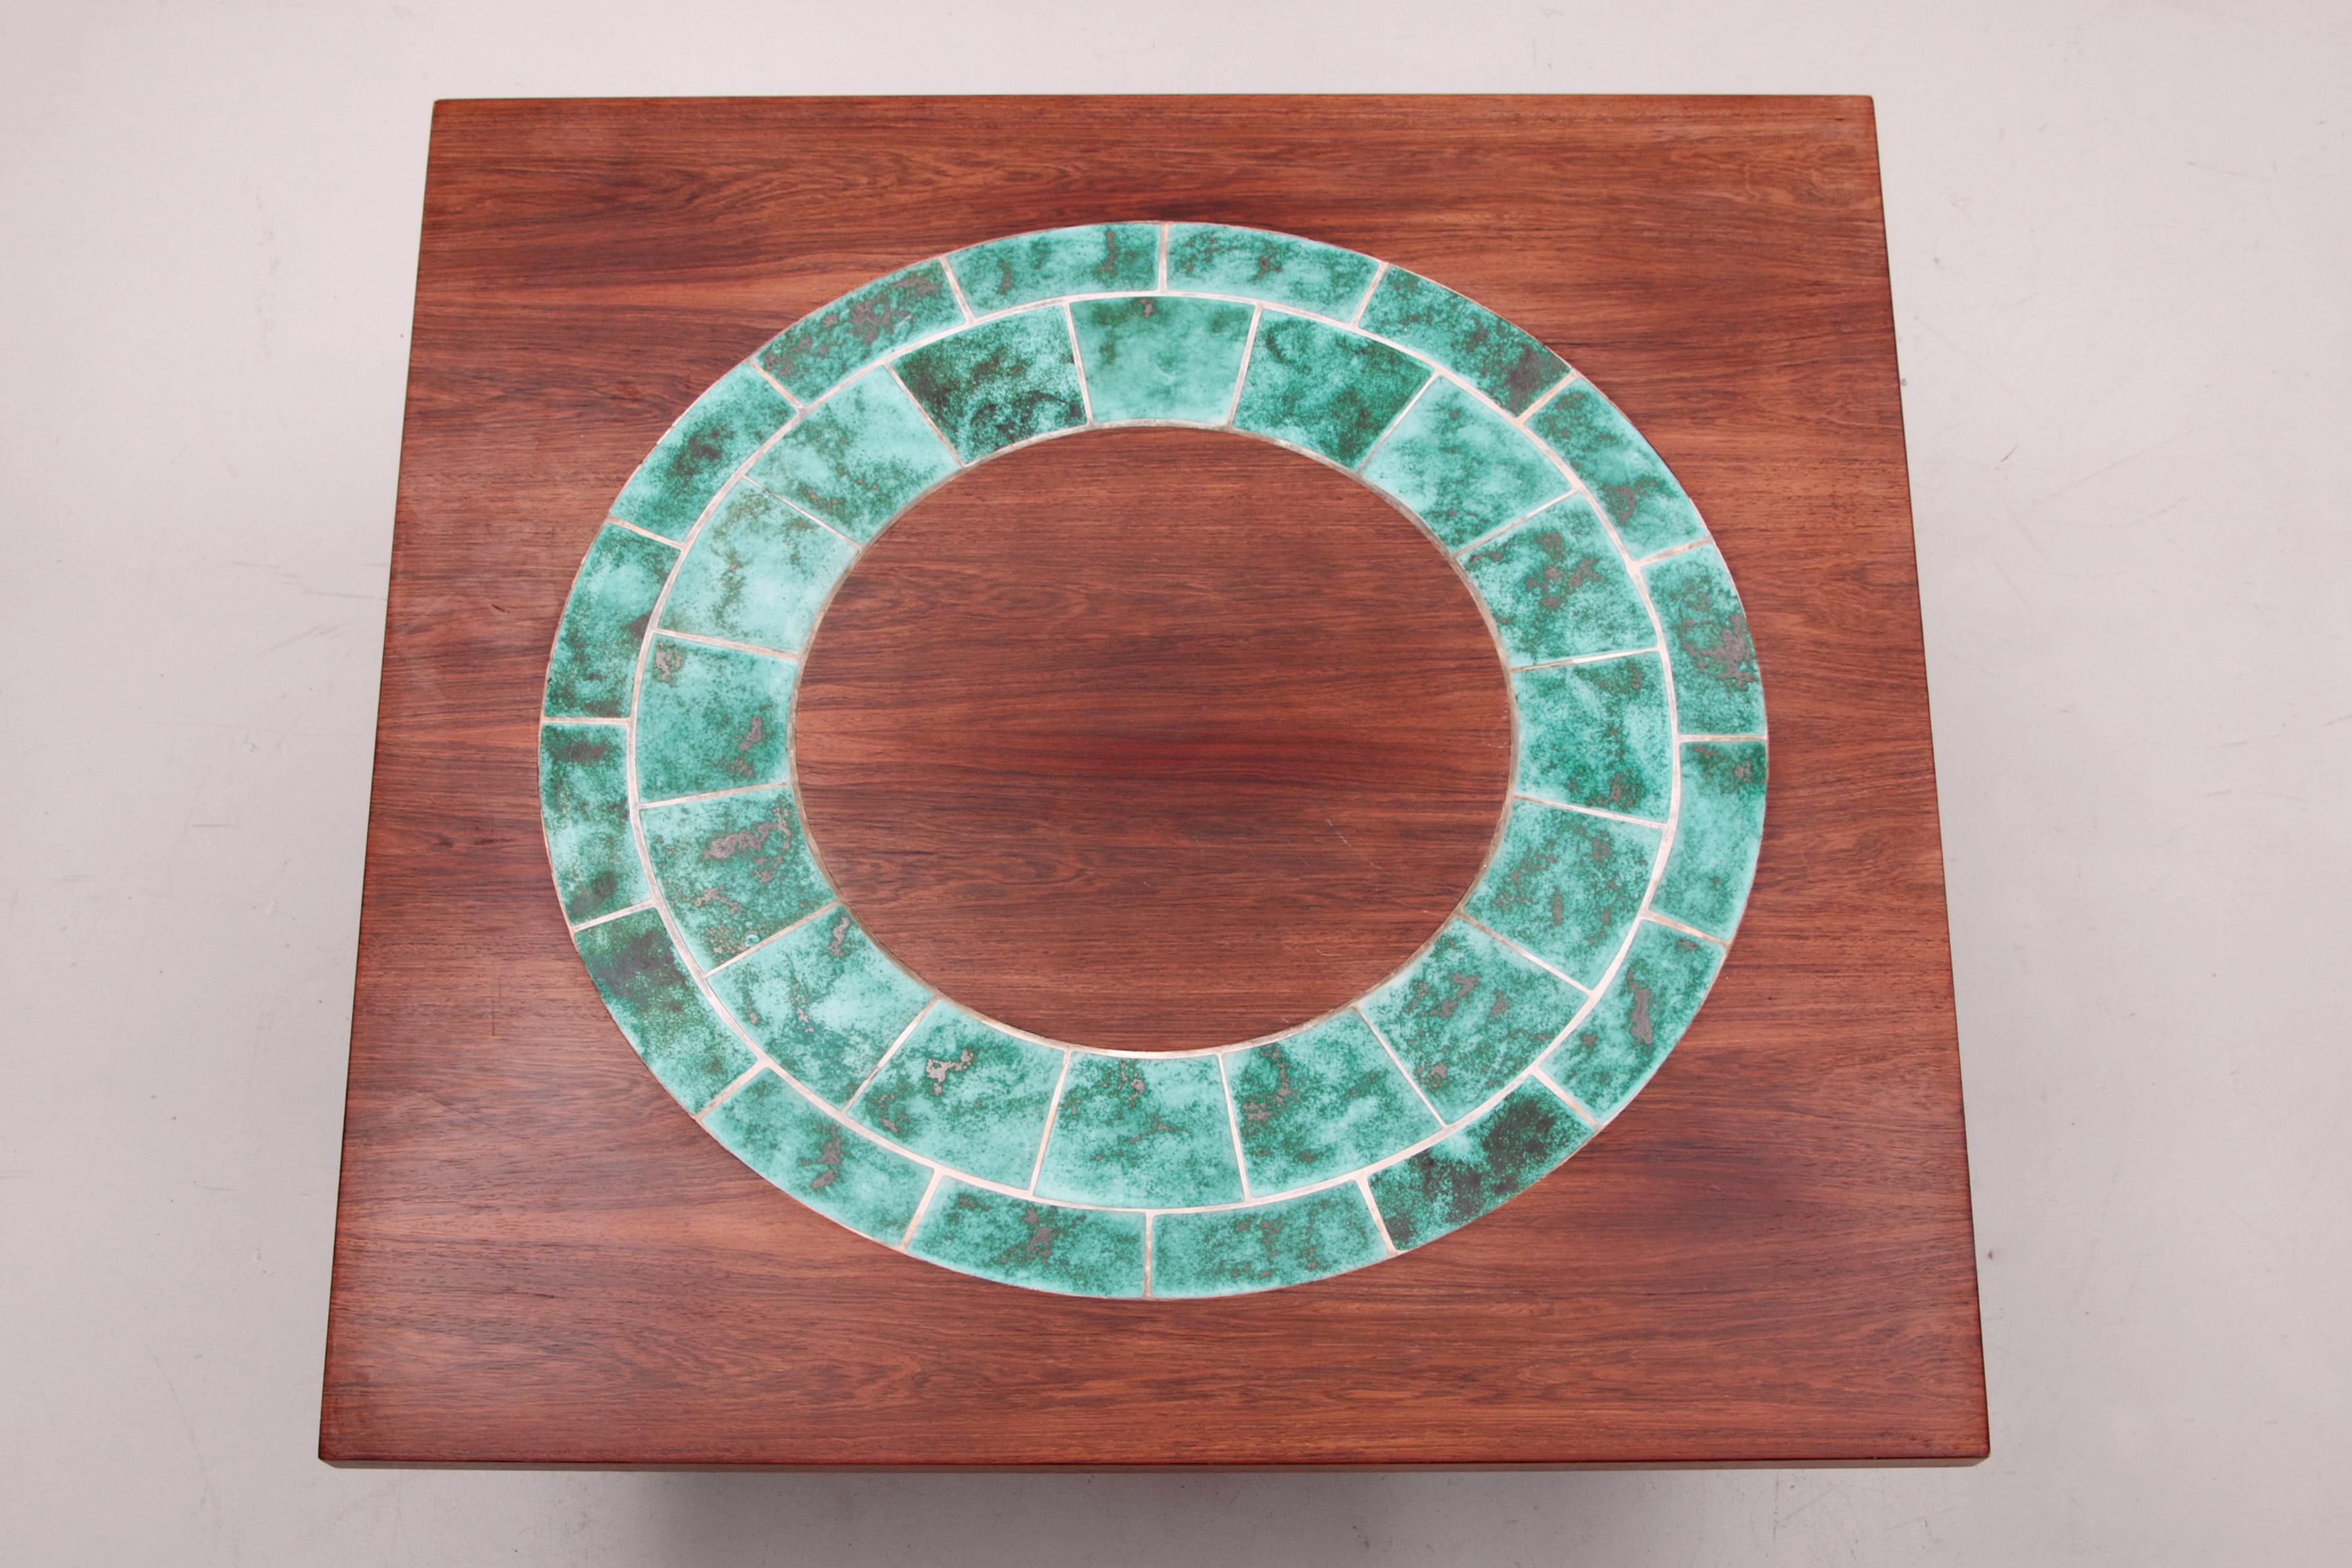 Danish Design Coffee Table with Ceramic Tiles, 1960 For Sale 3